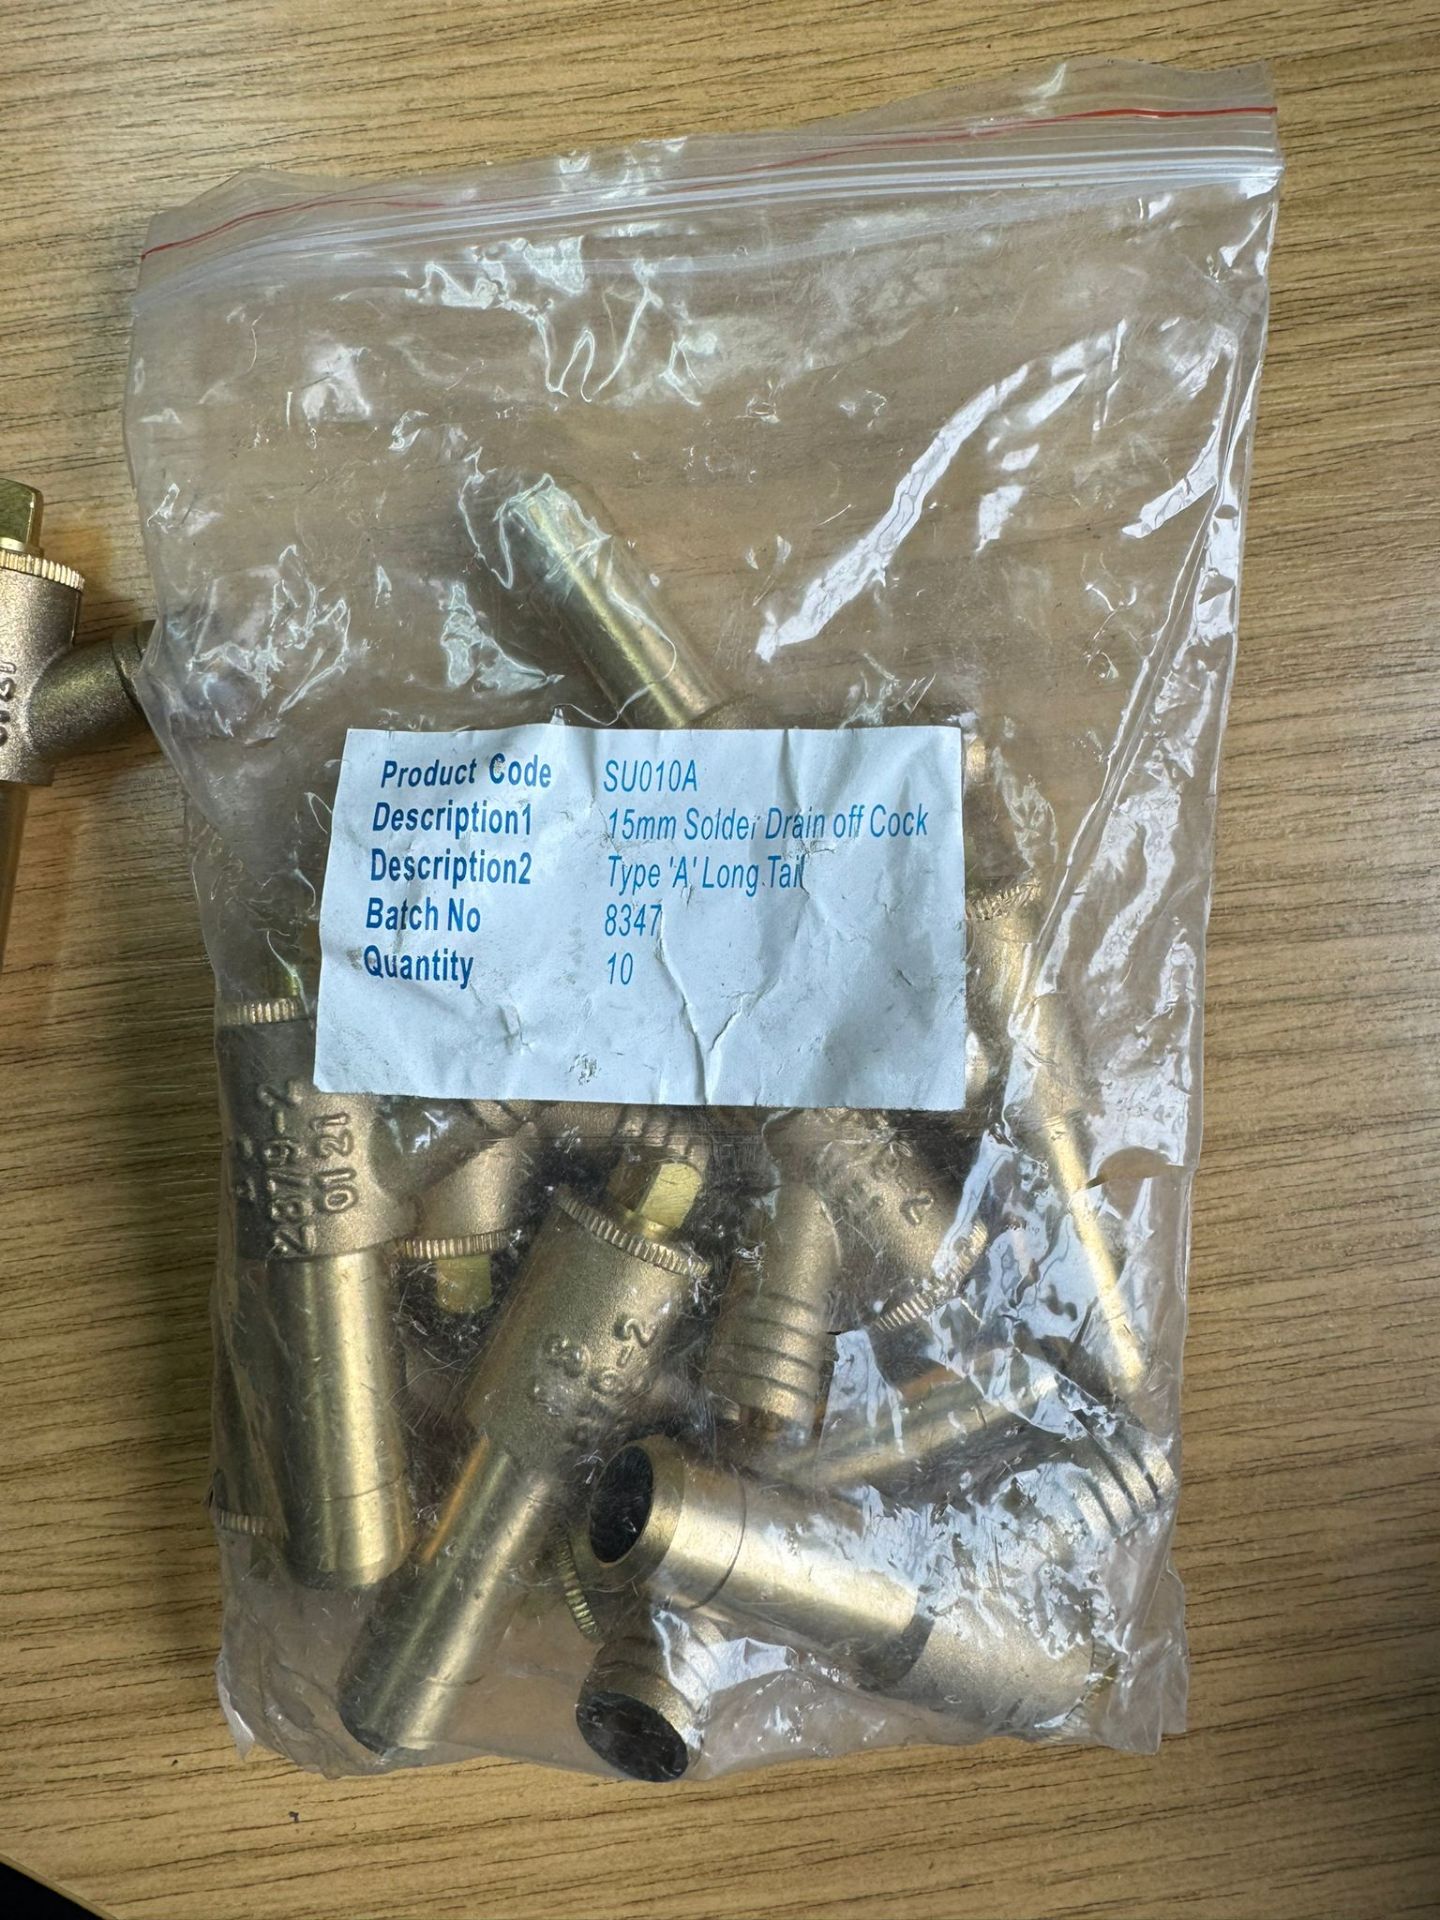 Bag of 10 long tail solder drain off cock - Image 4 of 6